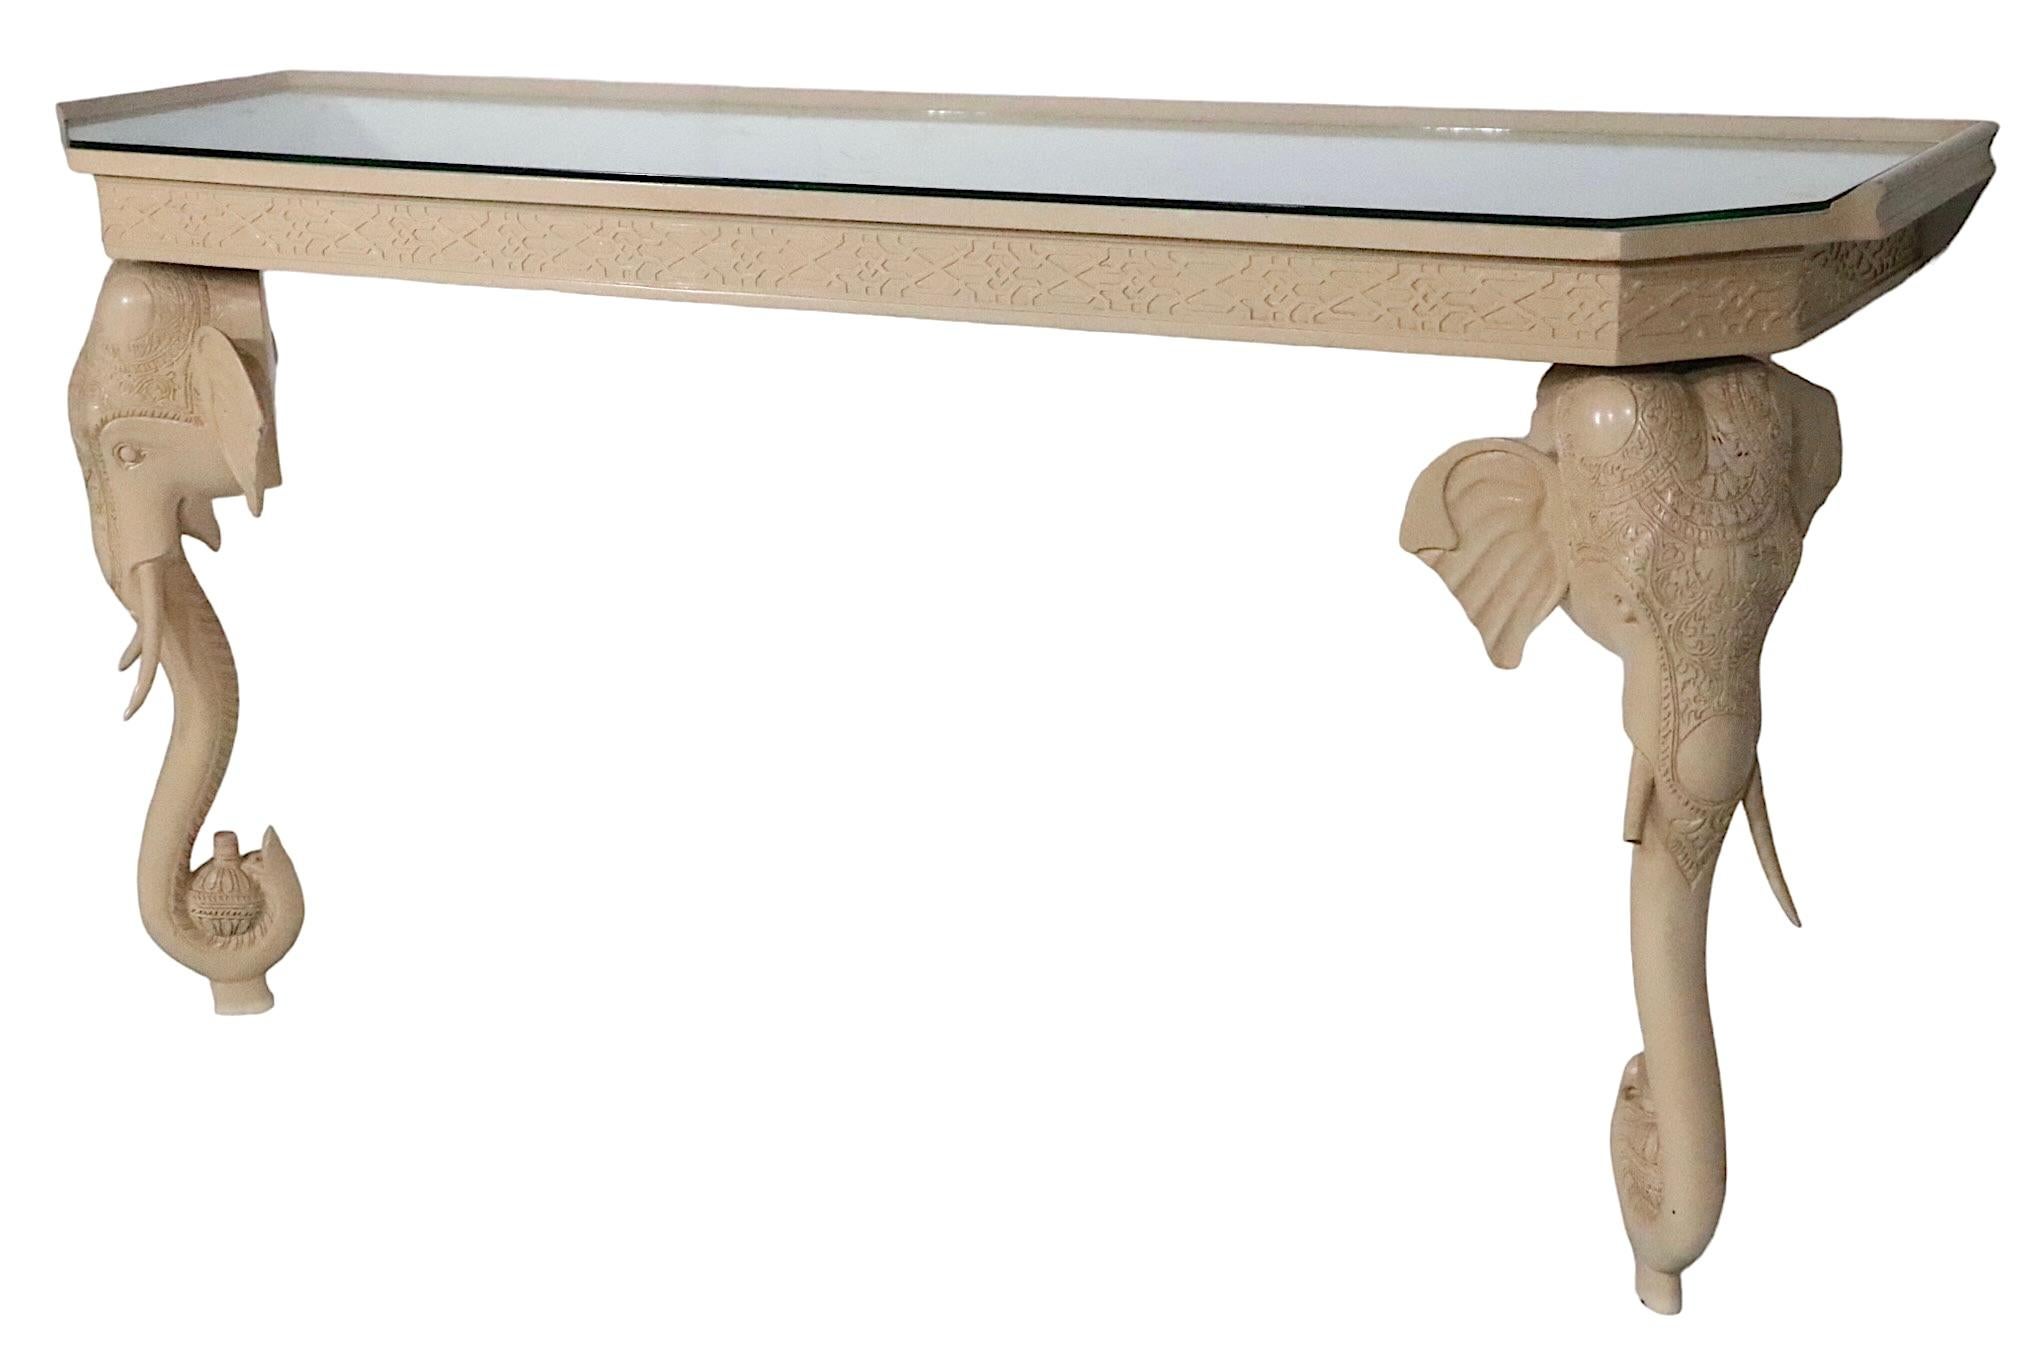 Chic Hollywood Regency console table having stylized elephant head, and trunk form legs. The table is of carved wood, in original cream, or off white, paint finish. This example is in good condition, it is structurally sound and sturdy, the paint